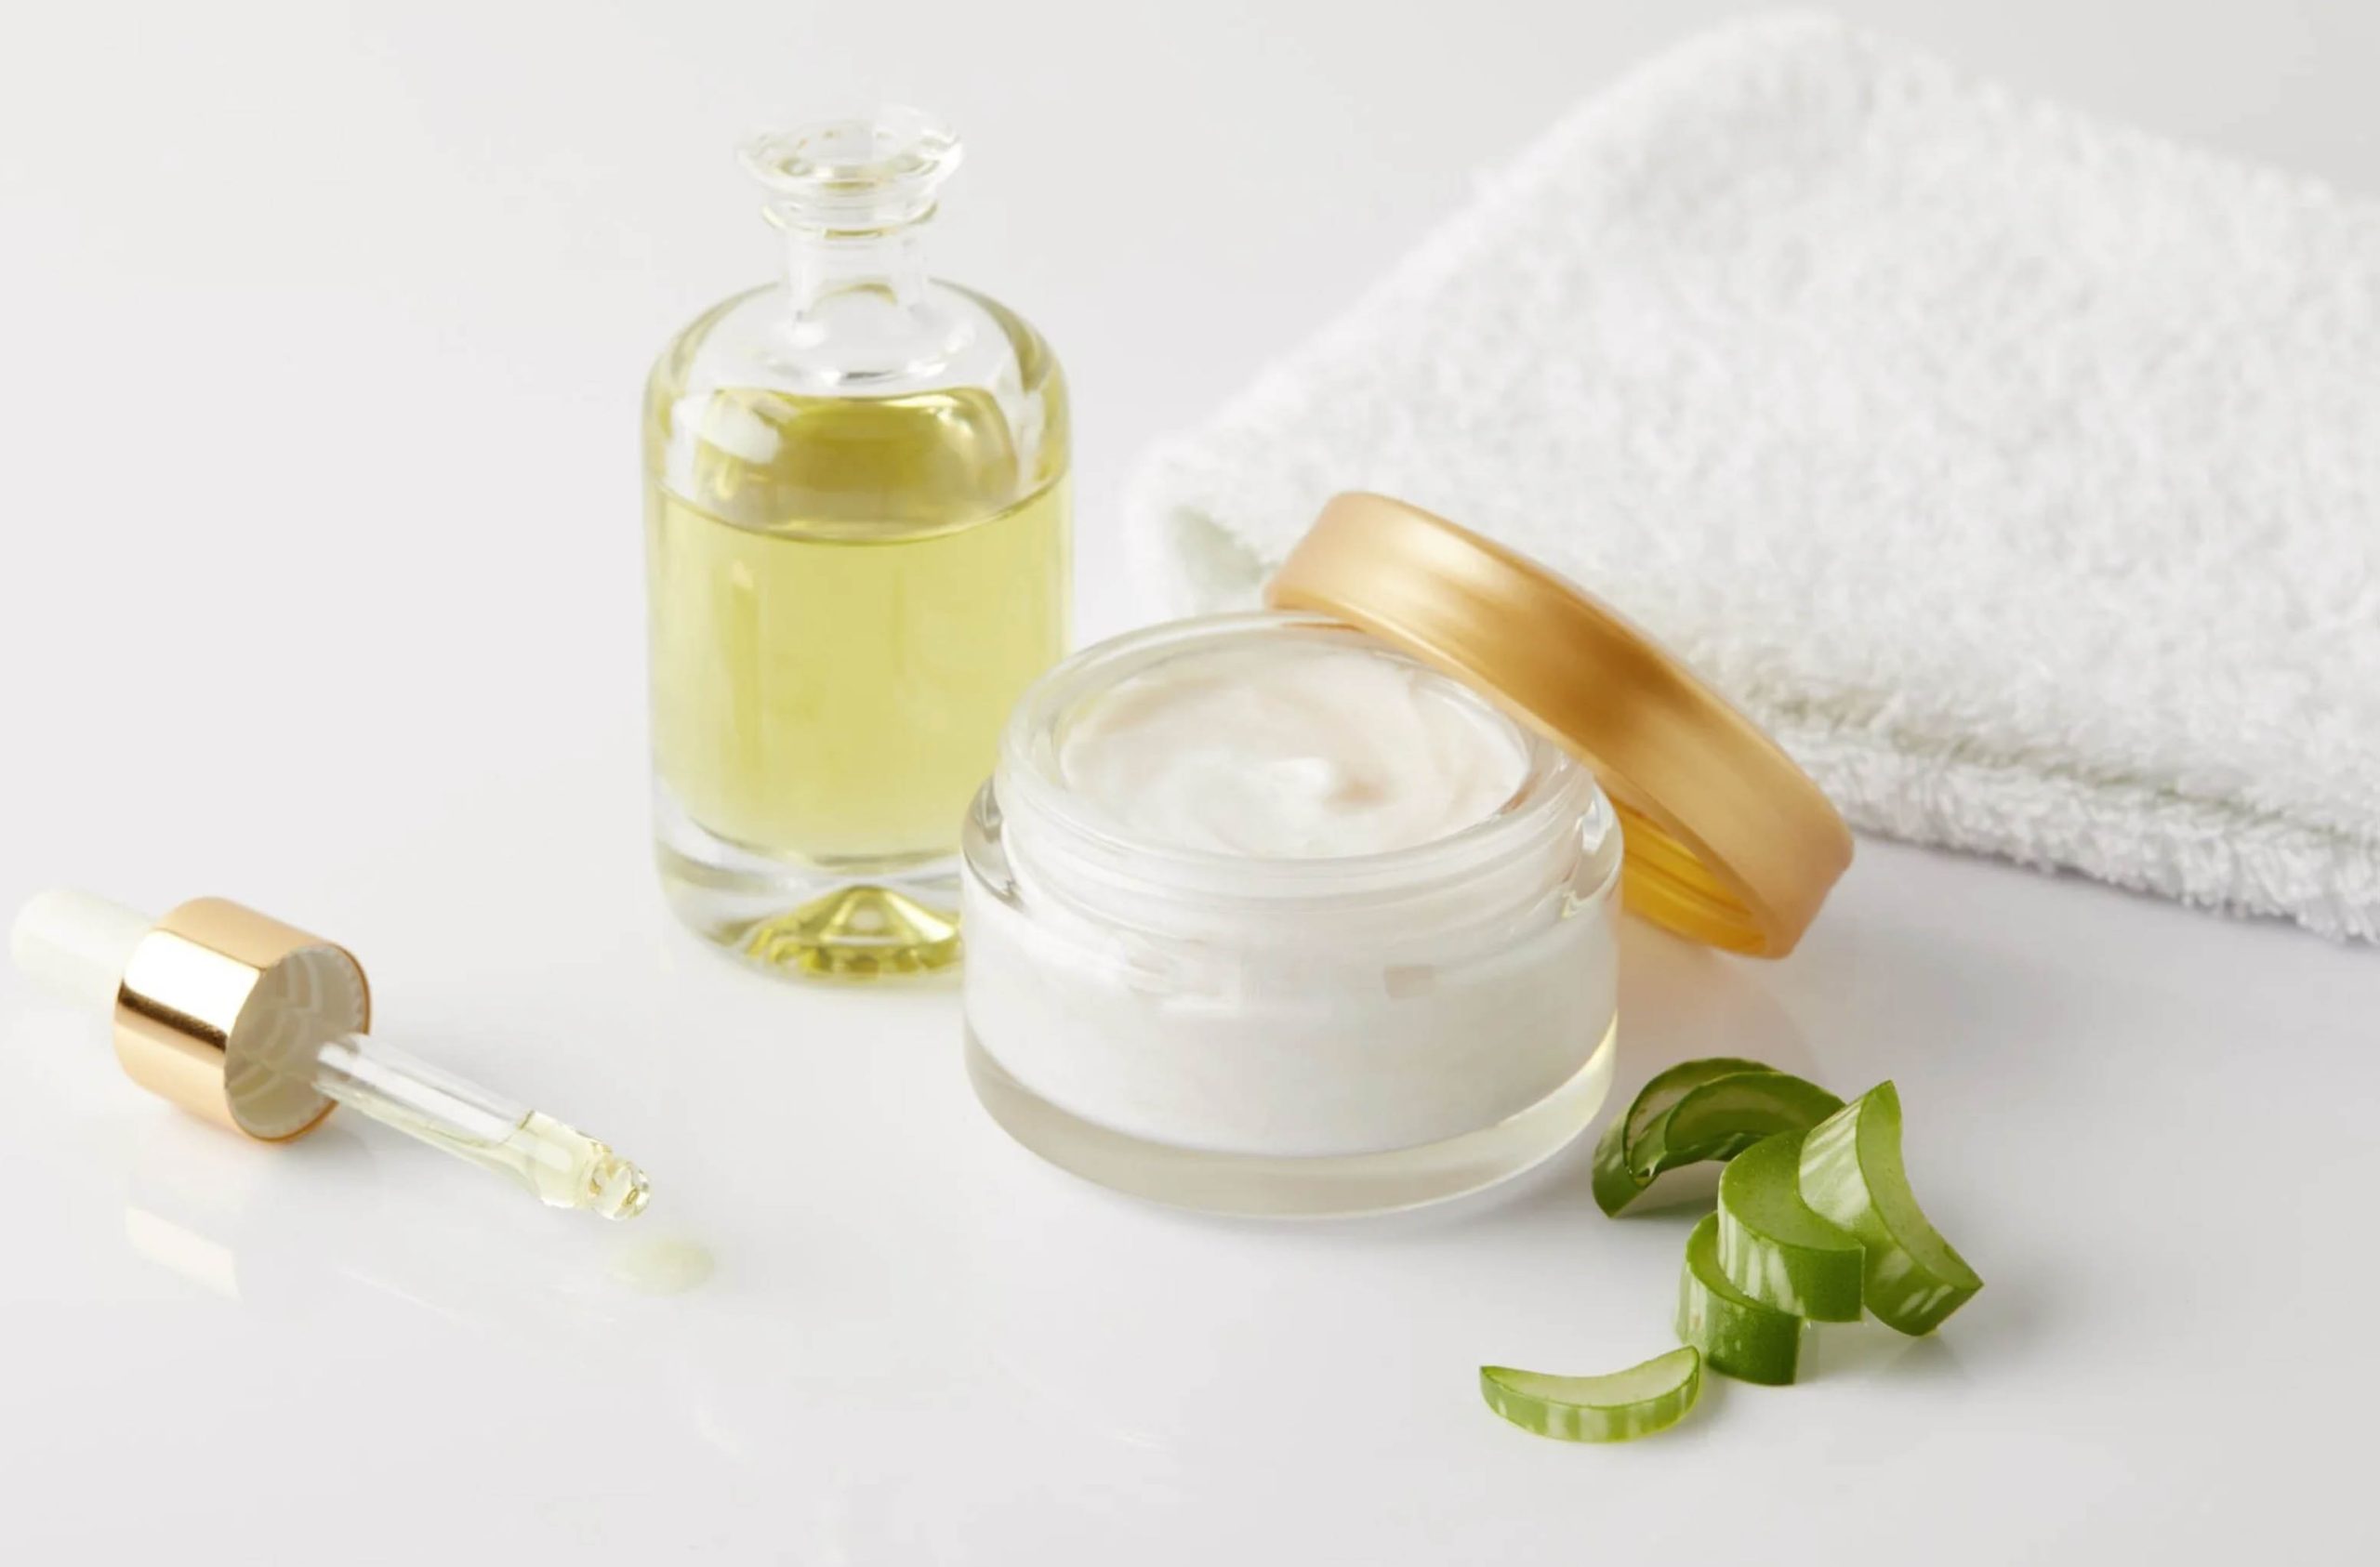 ACGrace - Aloe vera cream and a bottle of oil on a white surface.